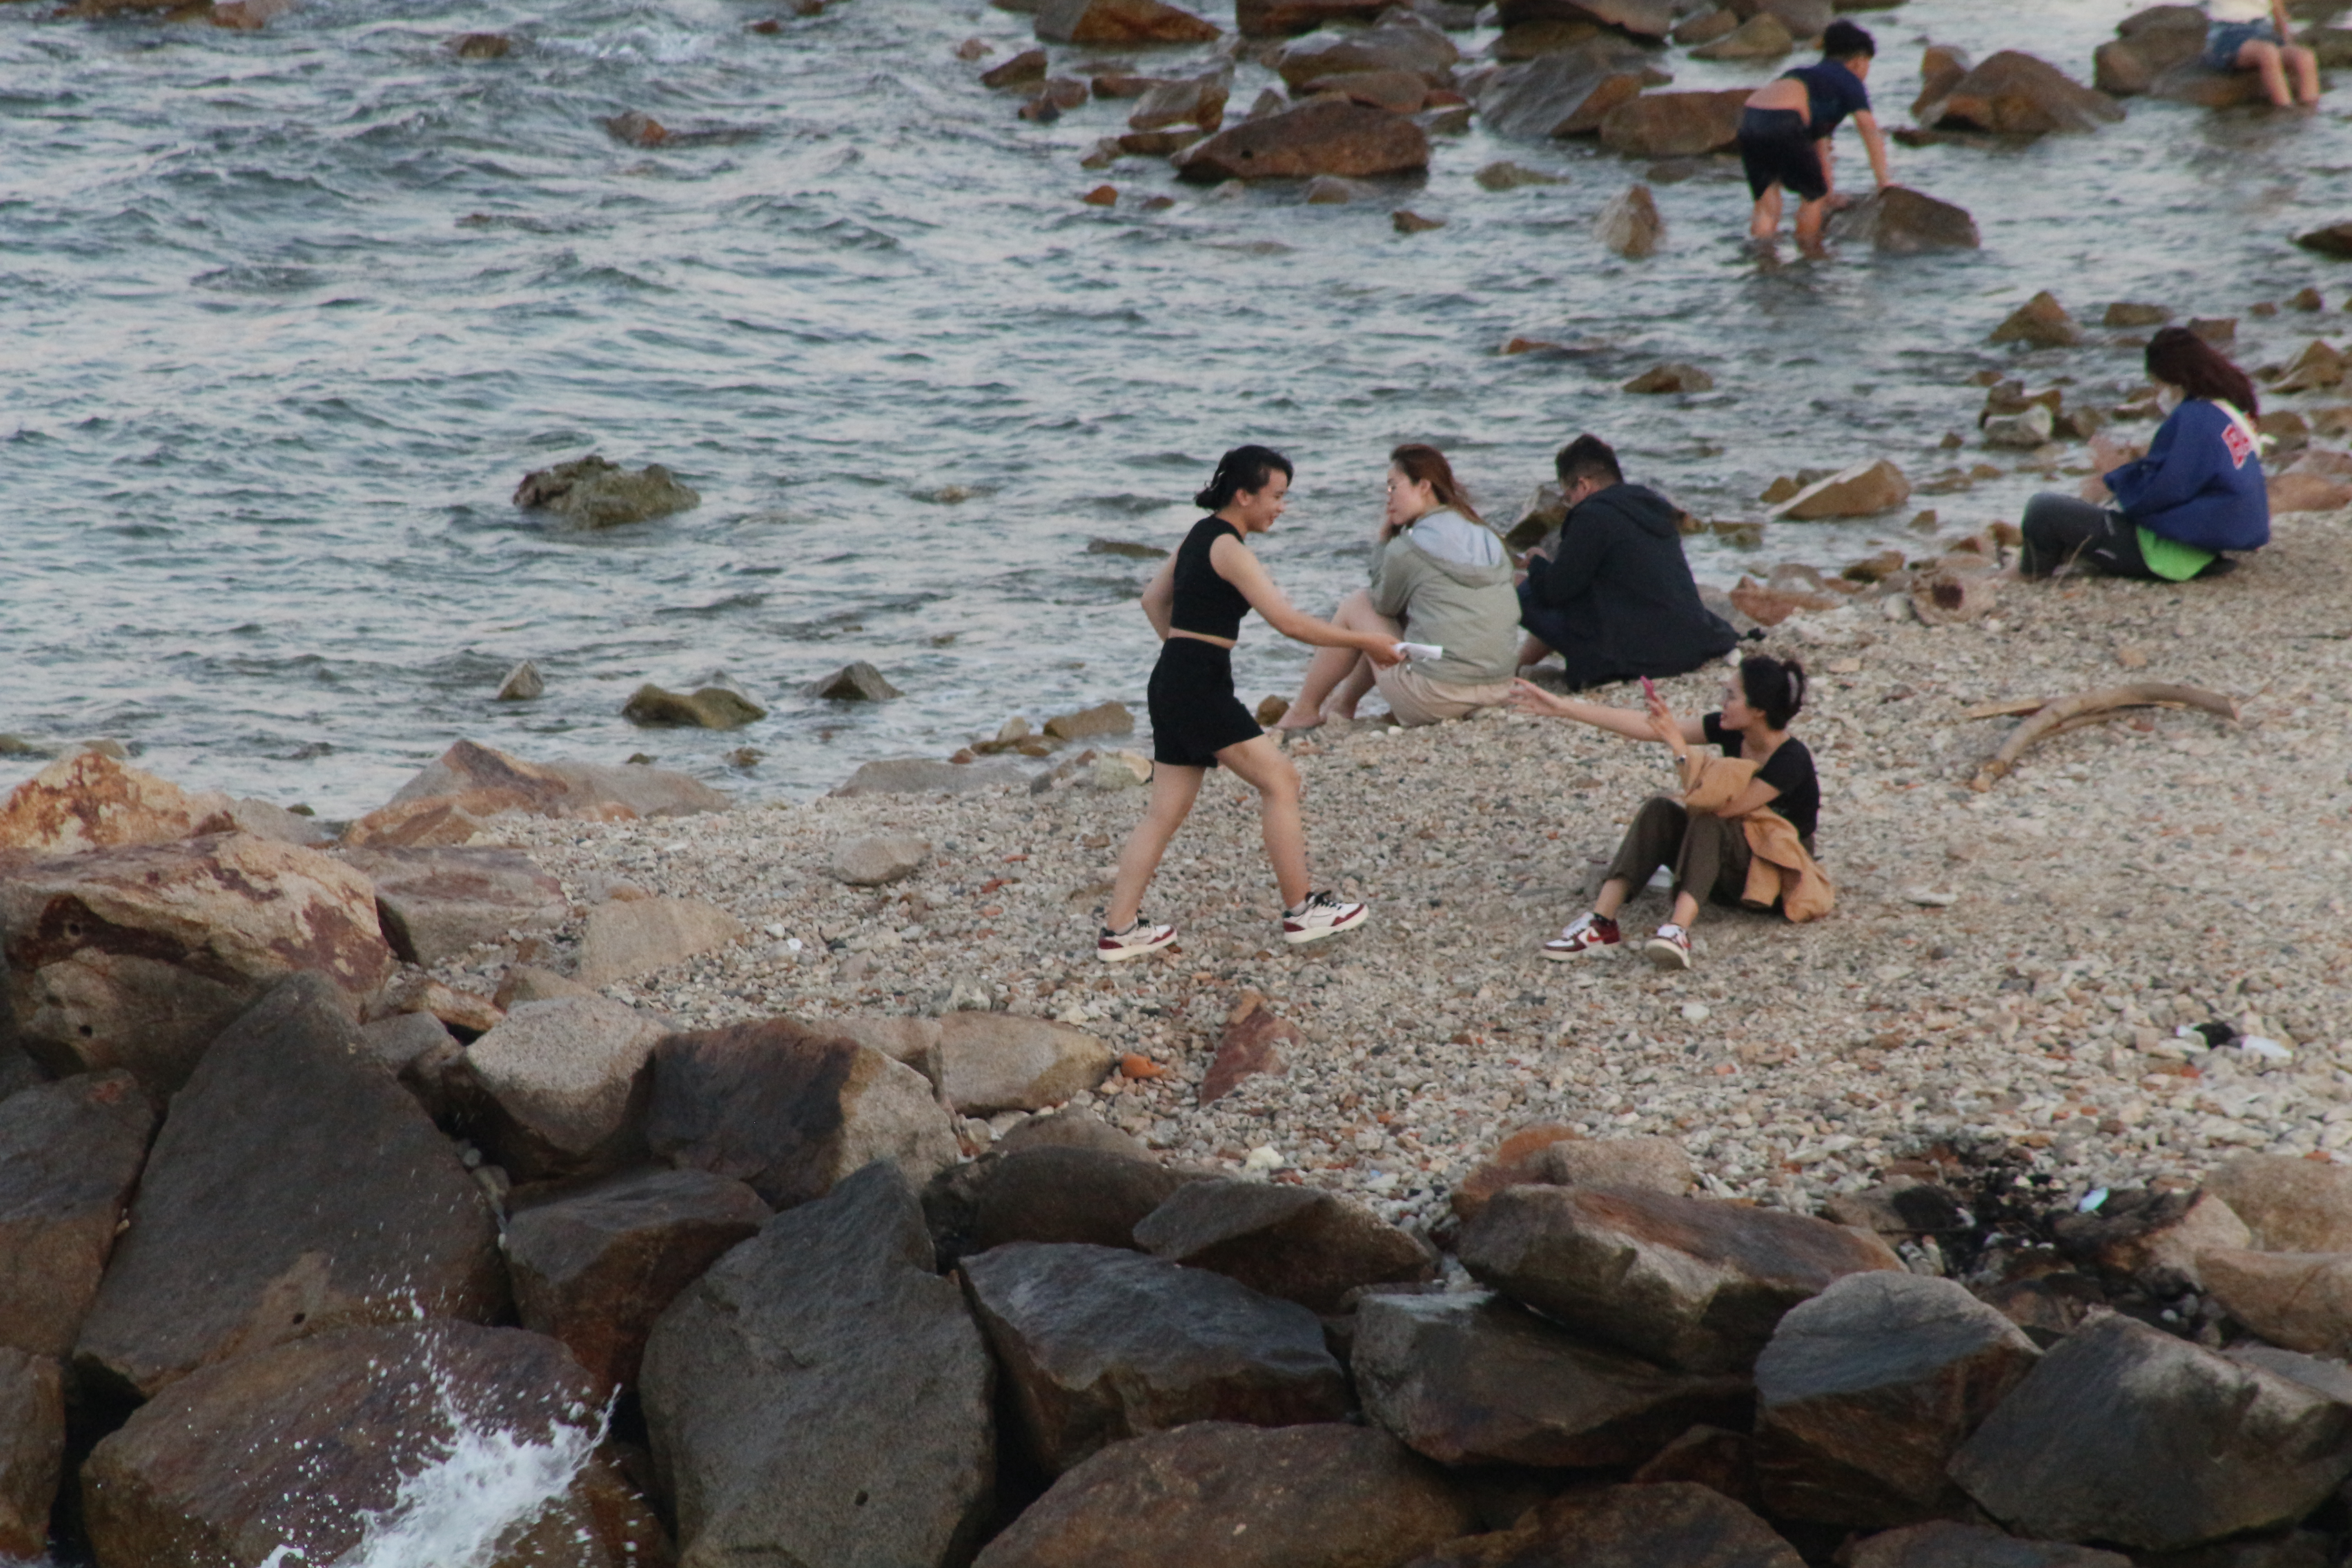 People hang out by the sea in Nha Trang City. Photo: Ray Kuschert / Tuoi Tre News